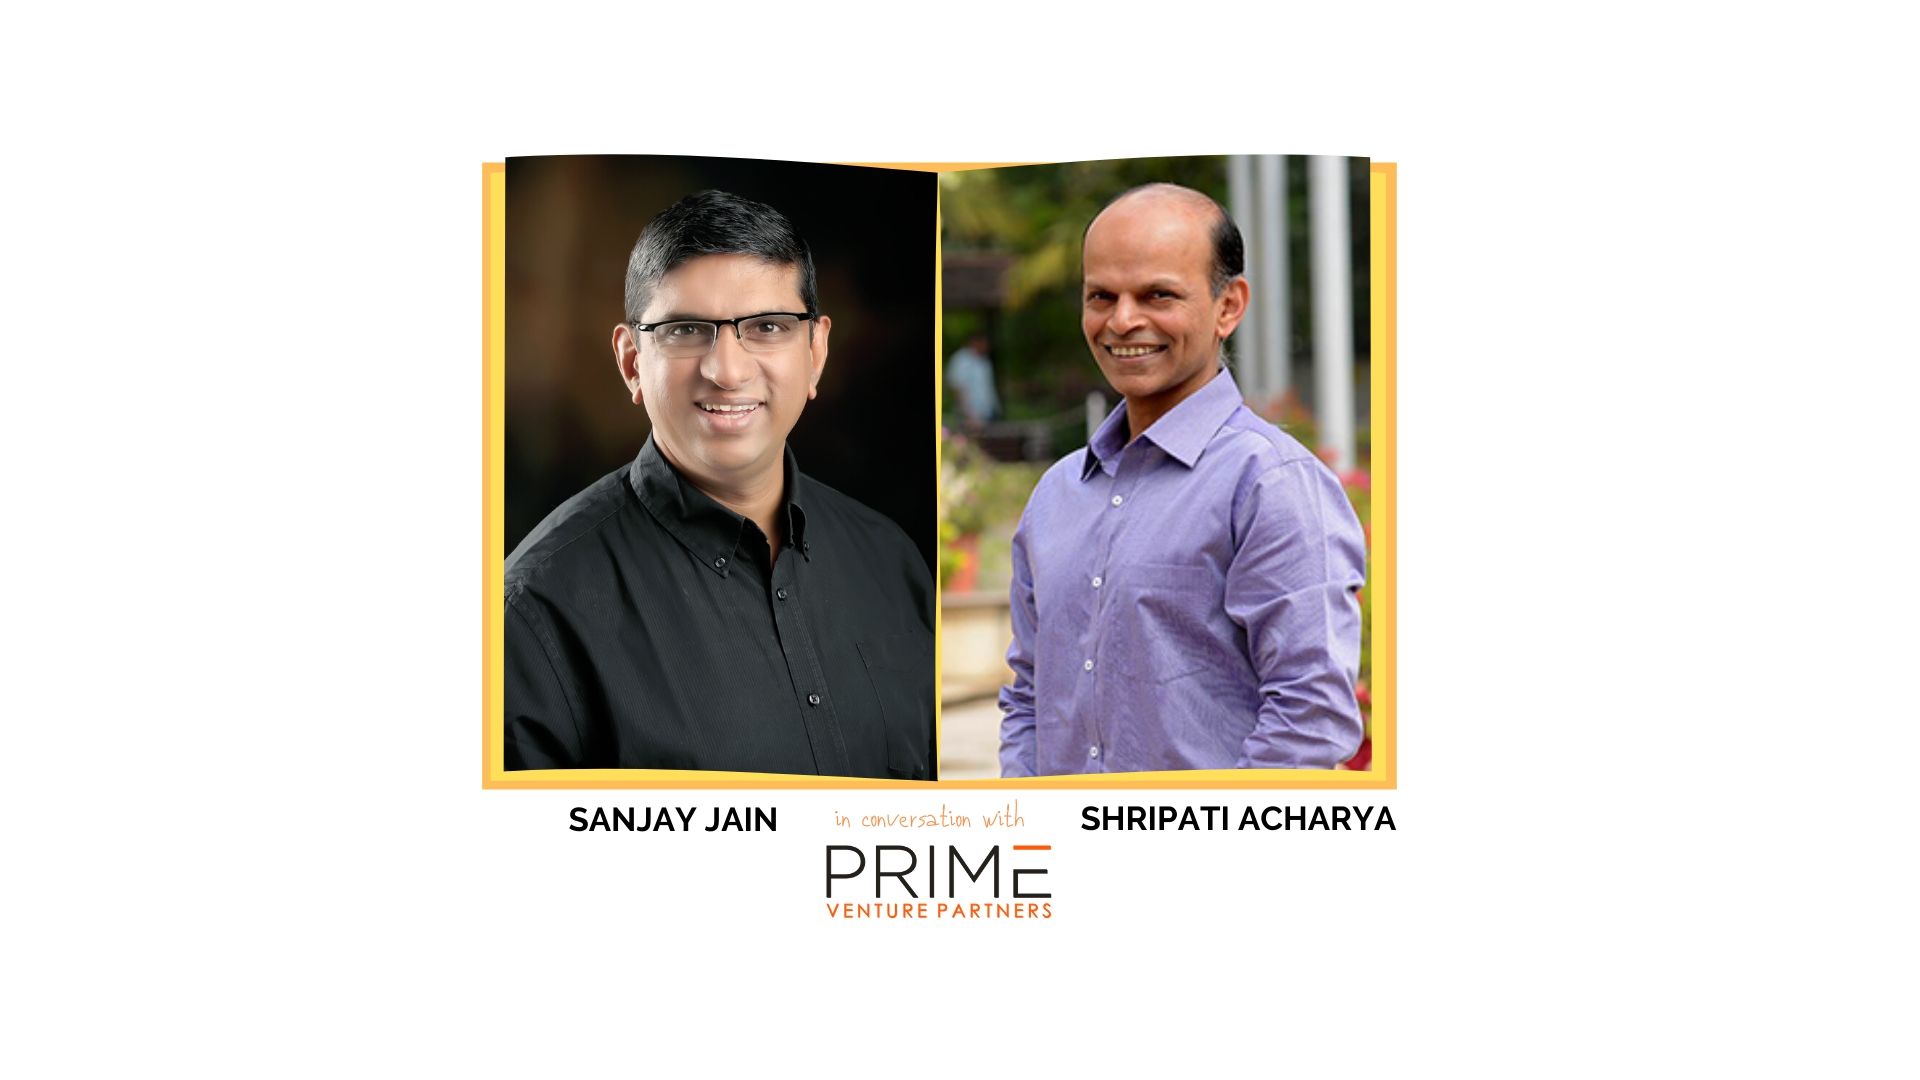 A graphic with guest(Sanjay Jain) and host's (Shripati Acharya) name and image.